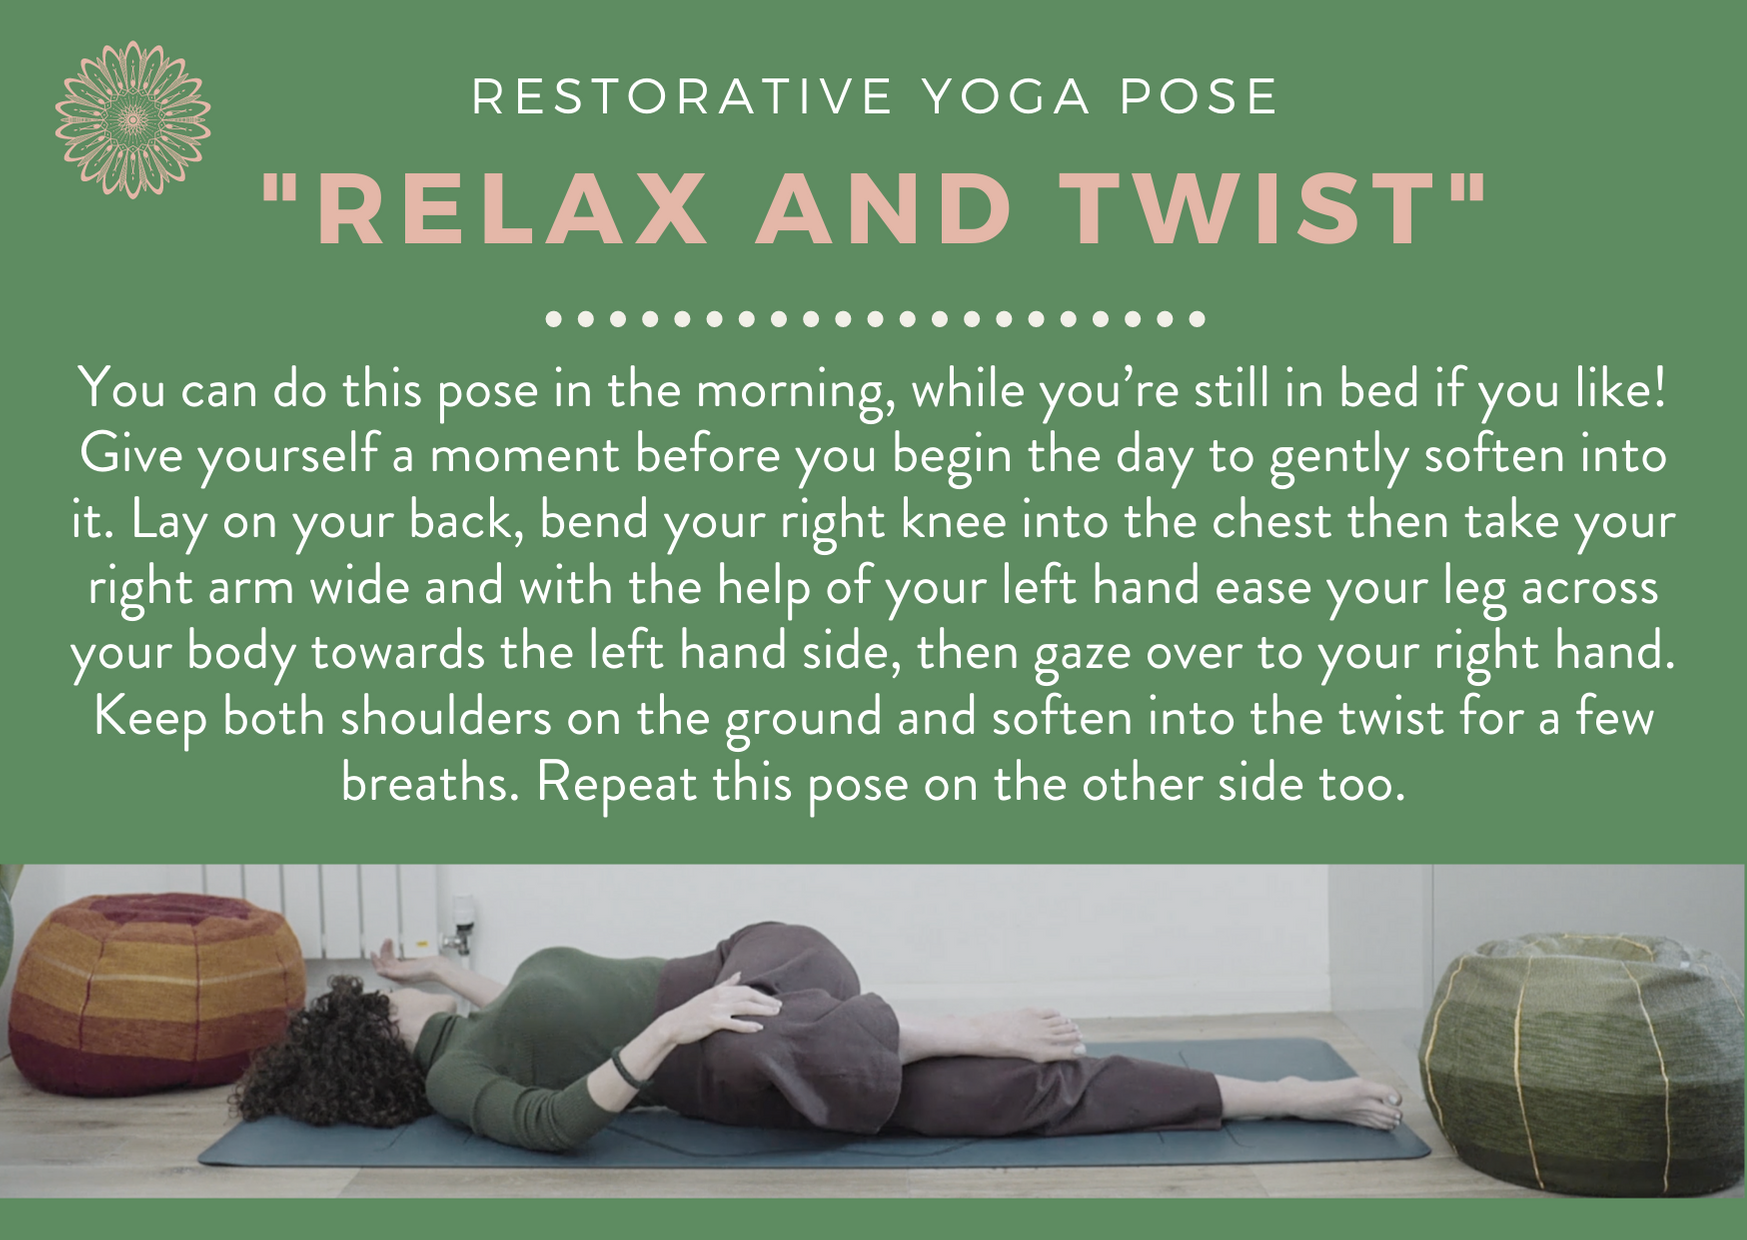 Relax and Twist Restorative Pose.png